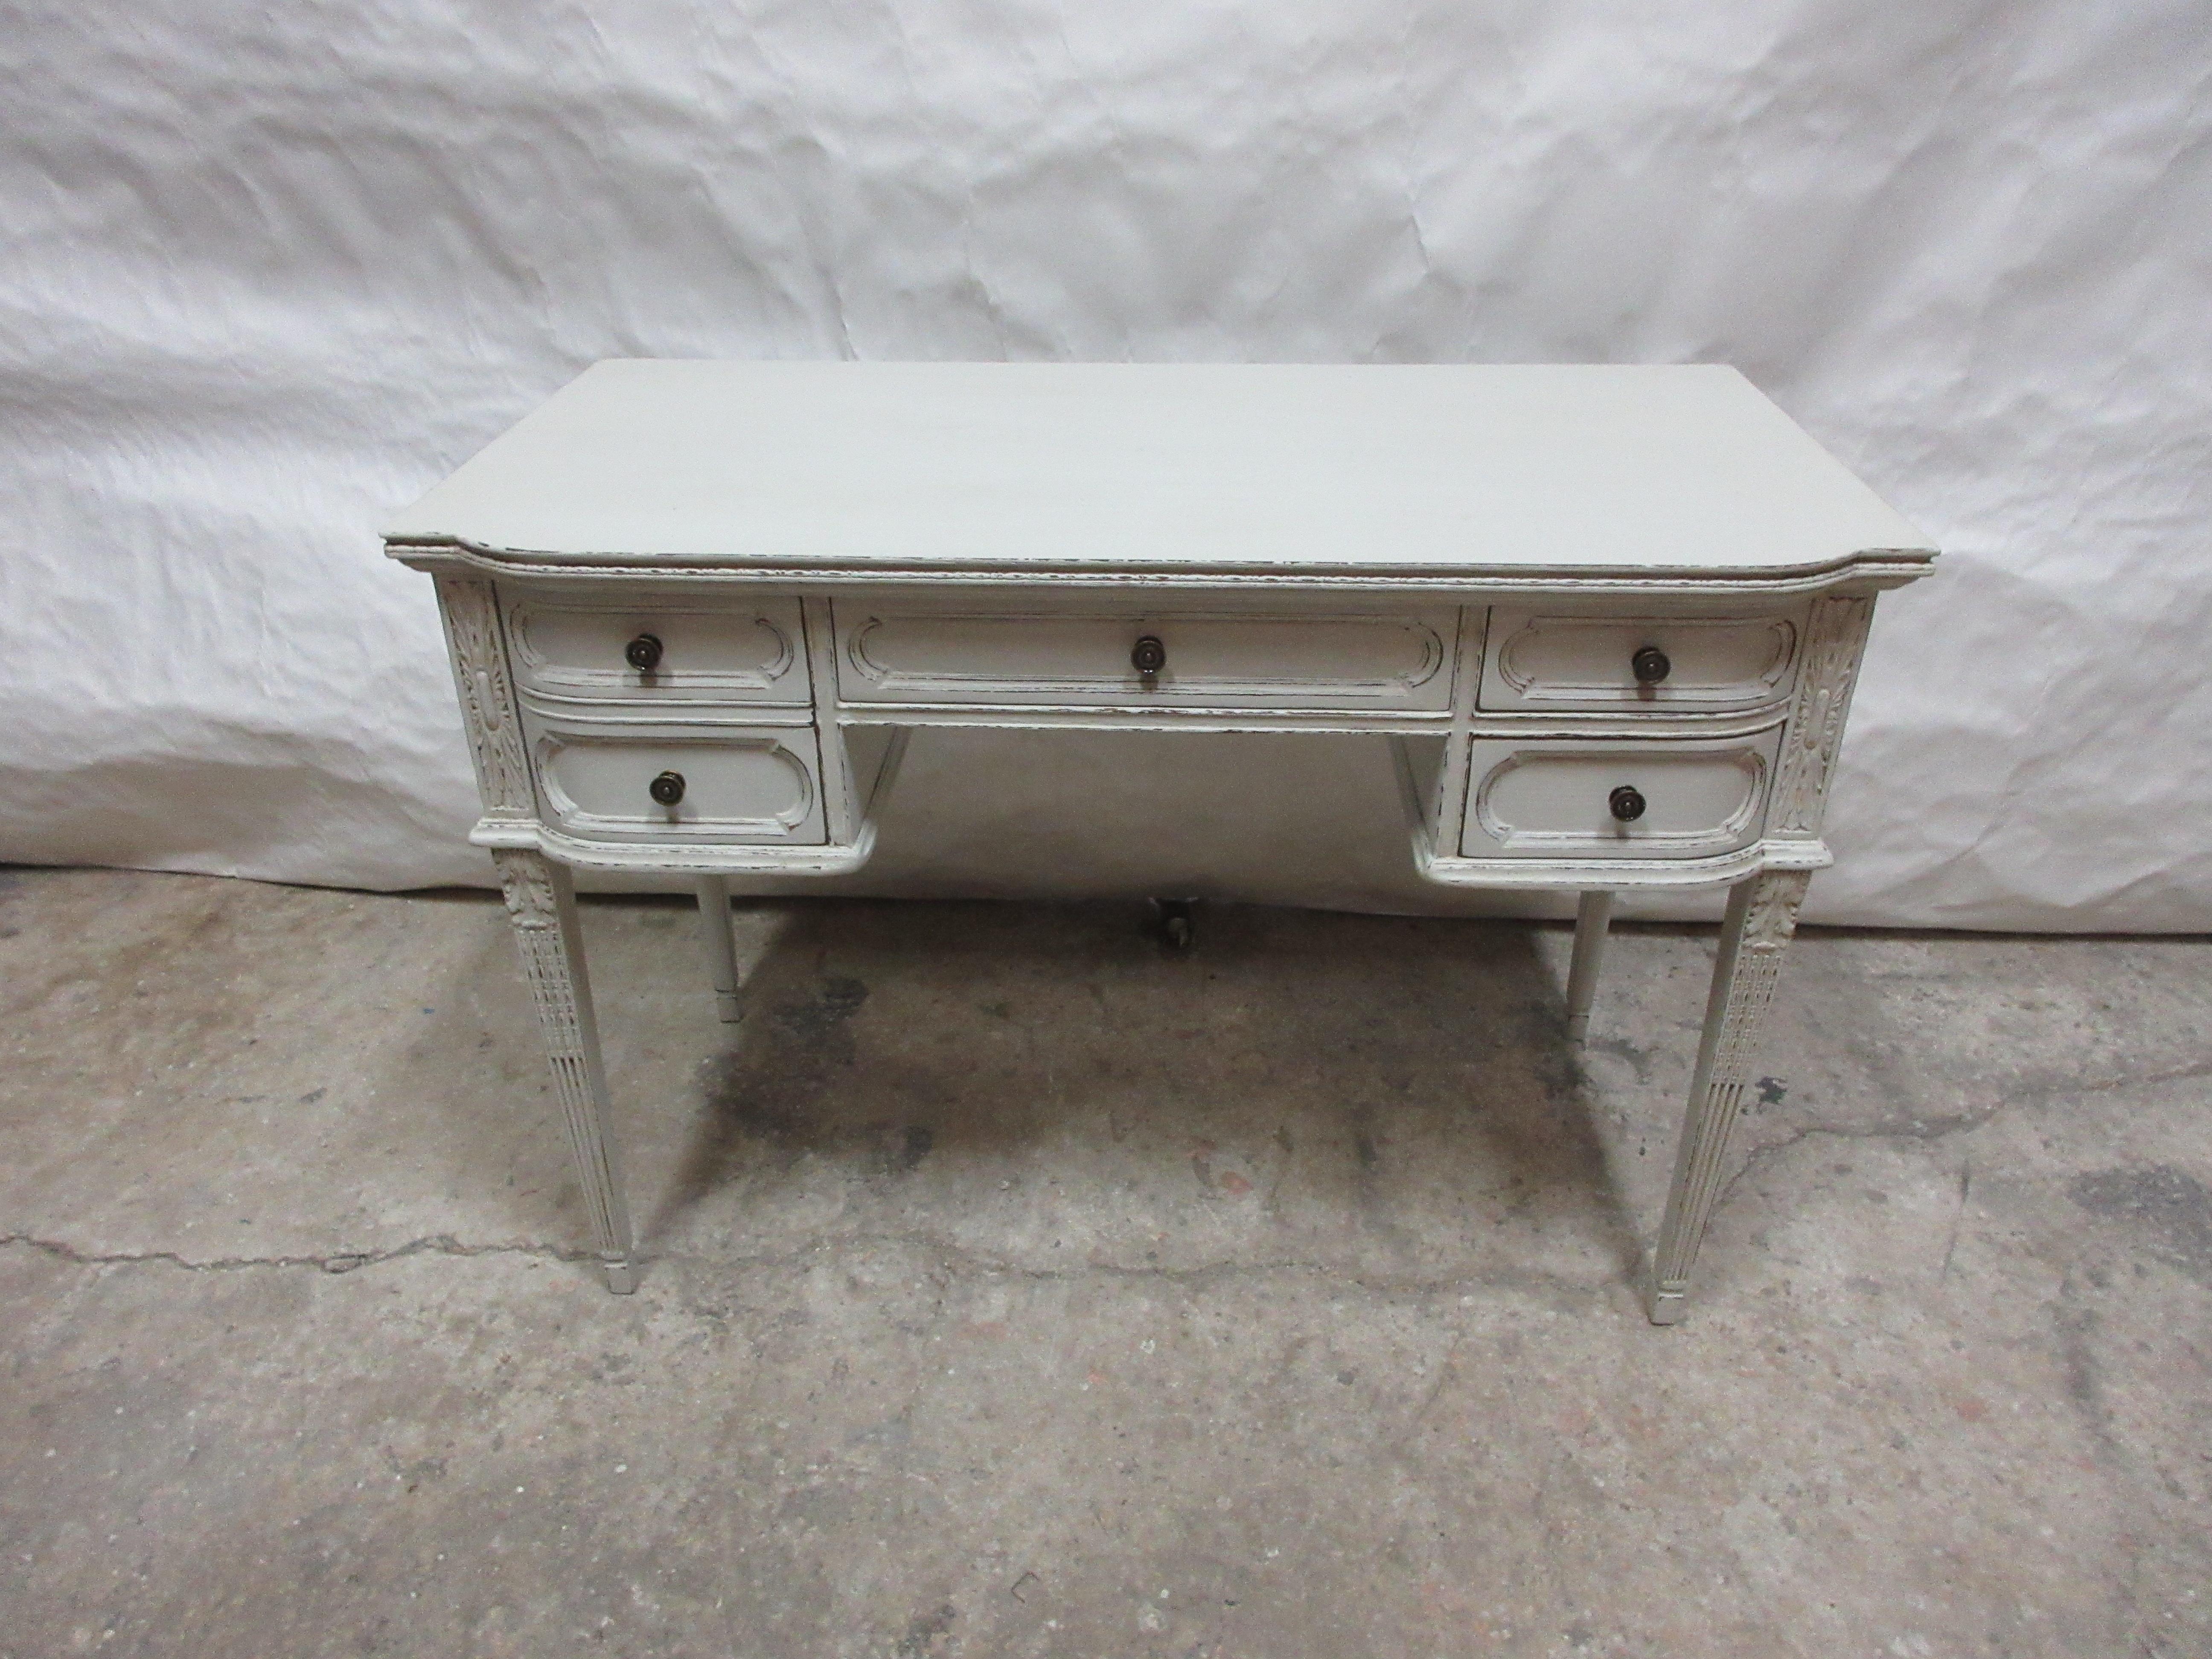 This is a Unique Gustavian Style Writing Desk. Its been restored and repainted with Milk Paints 